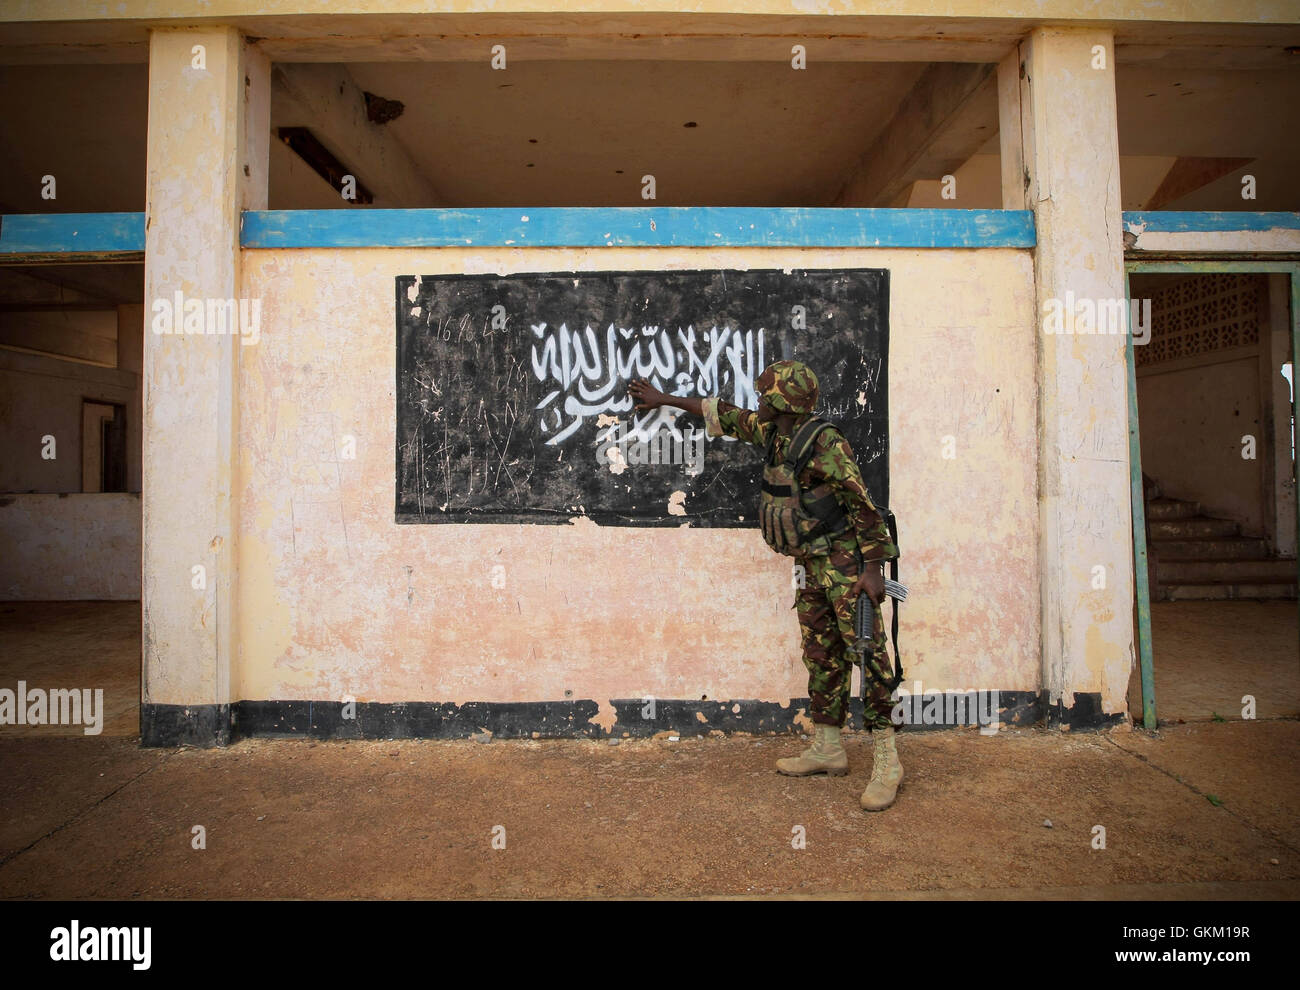 SOMALIA, Kismayo: In a handout photograph released by the African Union-United Nations Information Support Team 02 October, a soldier of the Kenyan Contingent serving with the African Union Mission in Somalia (AMISOM) gestures towards the black flag of the Al Qaeda-affiliated extremist group Al Shabaab painted on the wall of Kismayo Airport. Kenyan AMISOM troops moved into and through Kismayo, the hitherto last major urban stronghold of tAl Shabaab, on their way to the airport without a shot being fired following a two-month operation to liberate towns and villages across southern Somalia and  Stock Photo